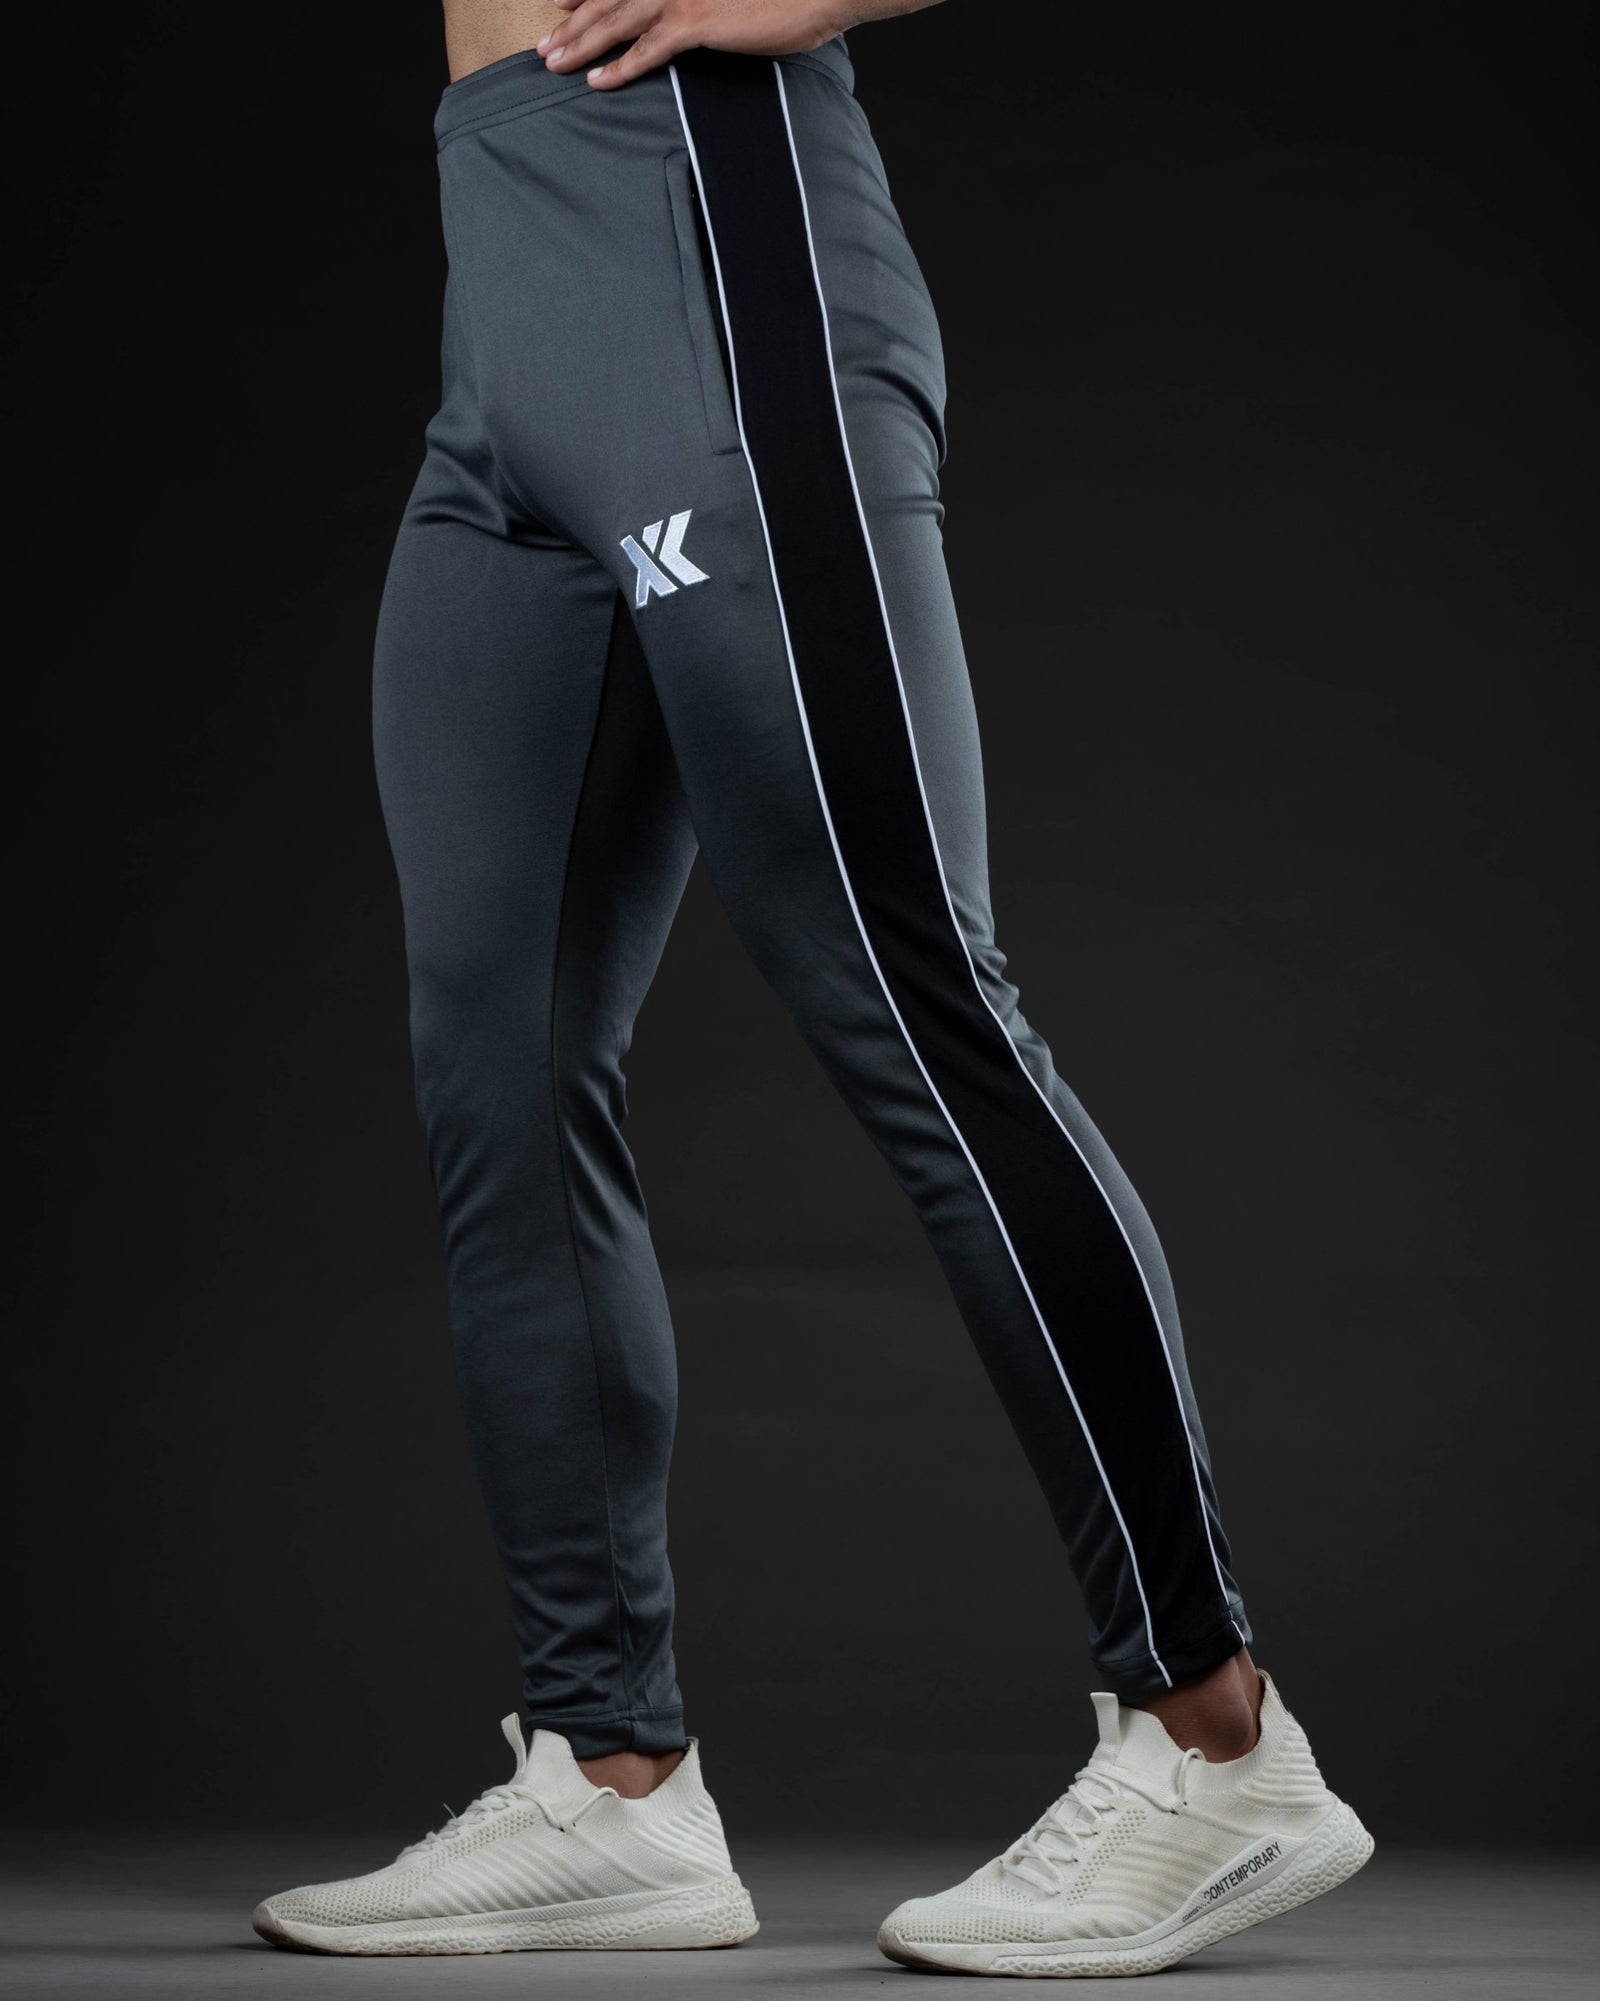 Mens Sports Trousers by New Line Industries mens sports trousers from  Sialkot  ID  3603194